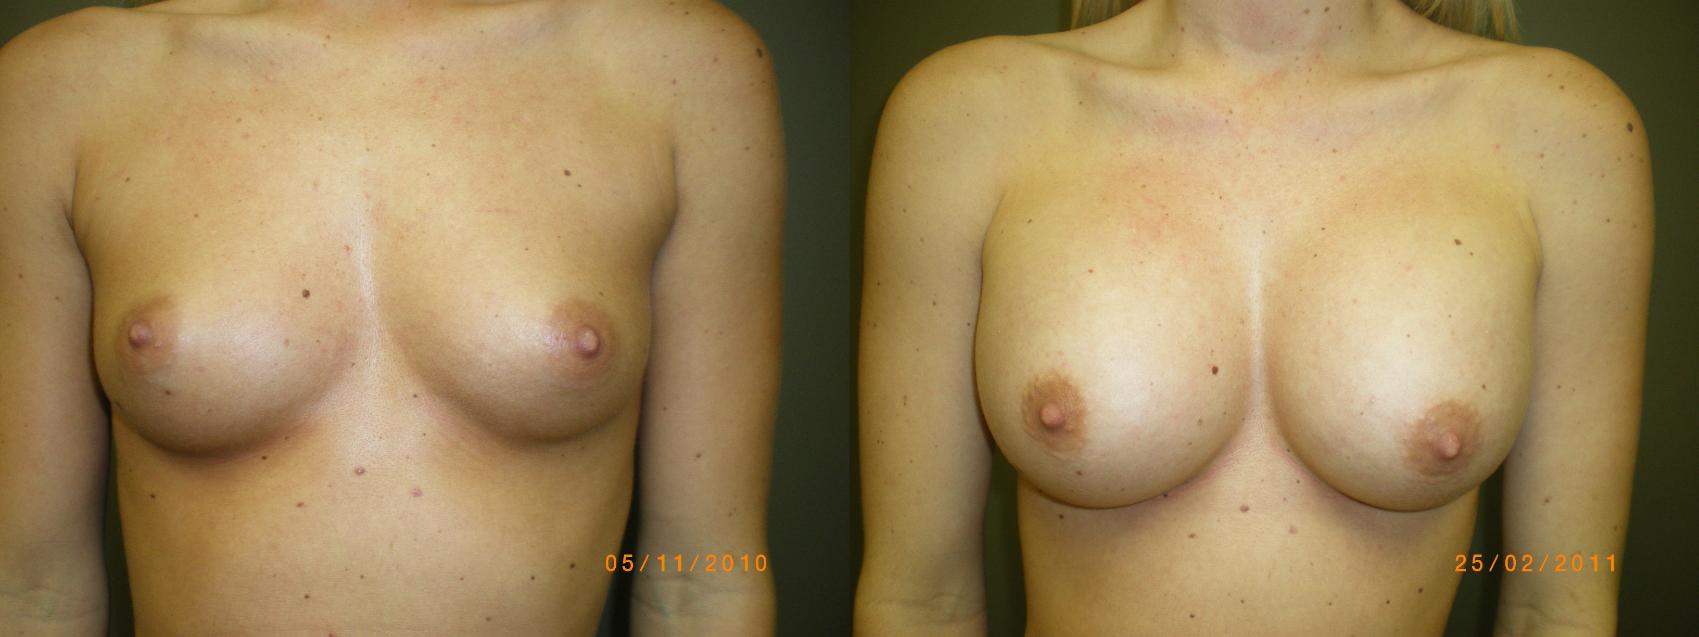 Breast Augmentation Before & After Photo | Atlanta, GA | Plastic Surgery Center of the South